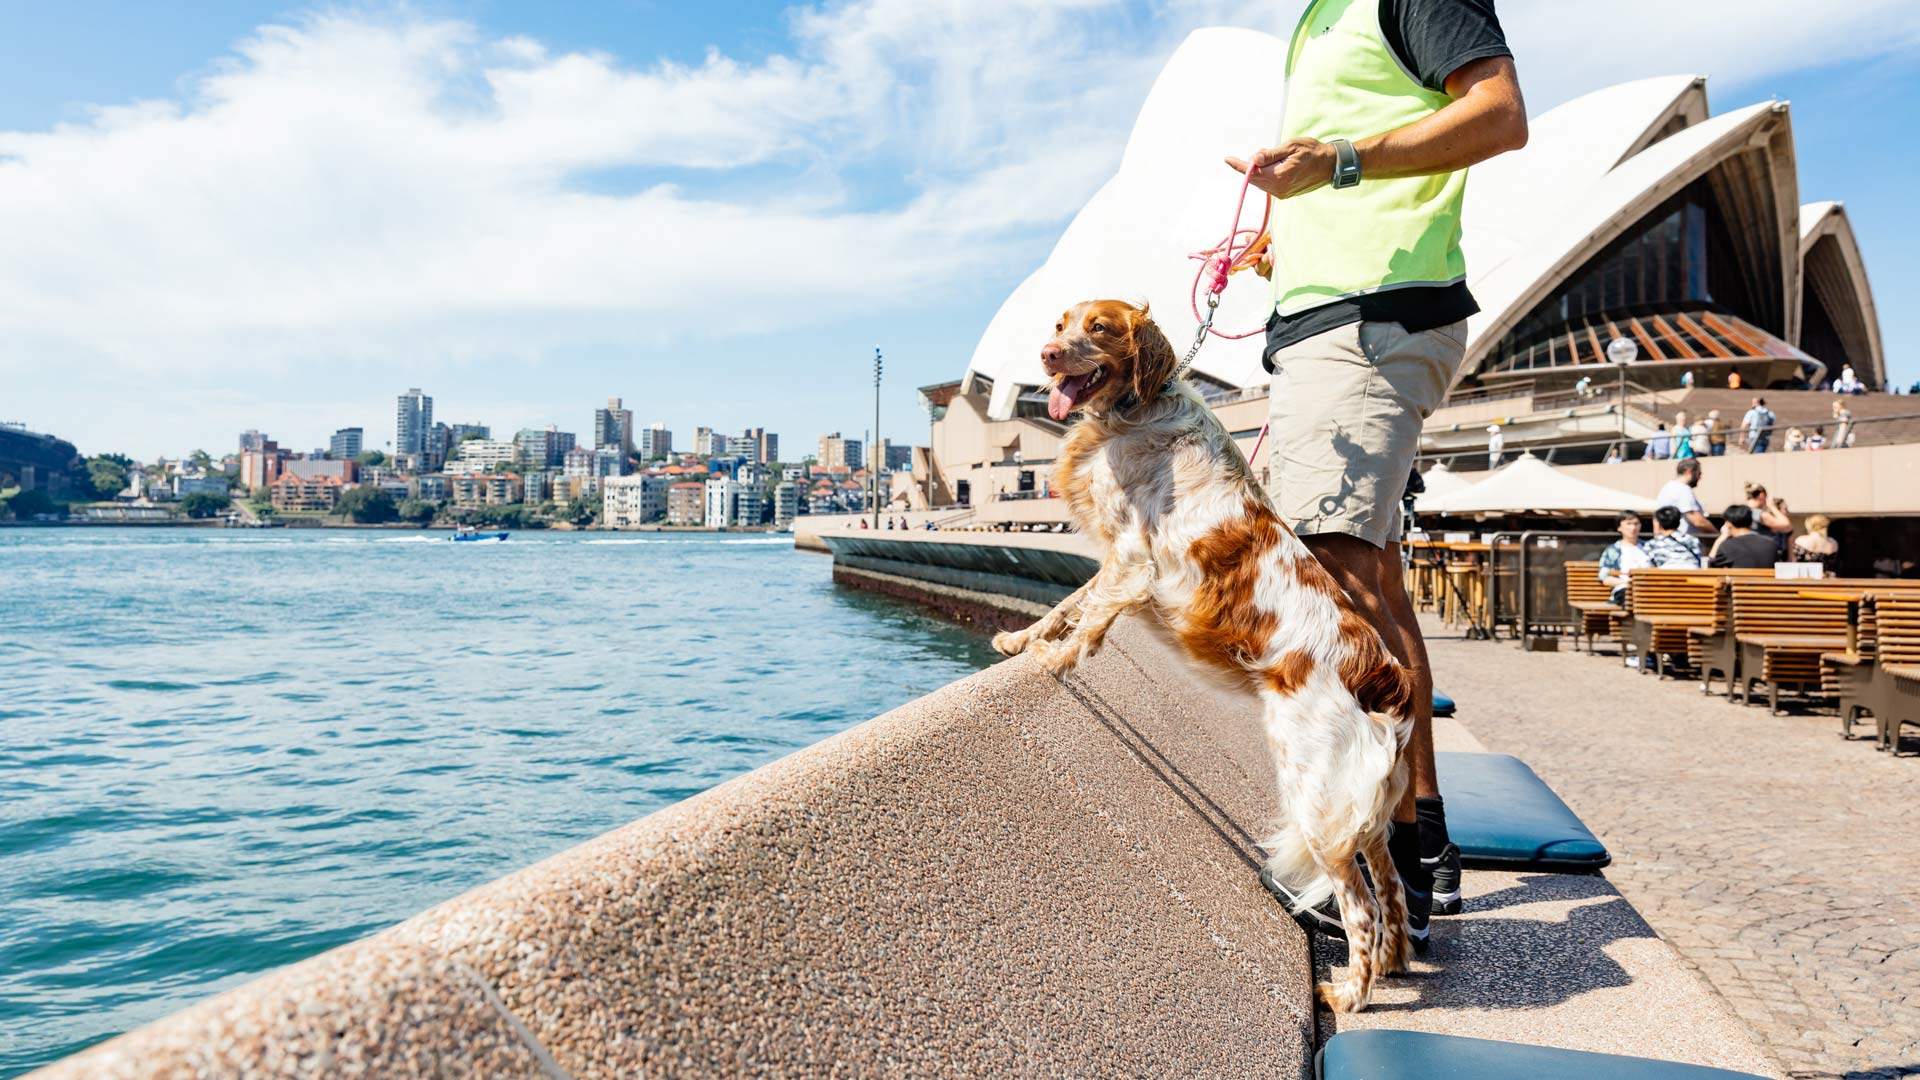 A Group of Very Good Dogs Is Helping to Keep the Sydney Opera House's Restaurants Seagull-Free